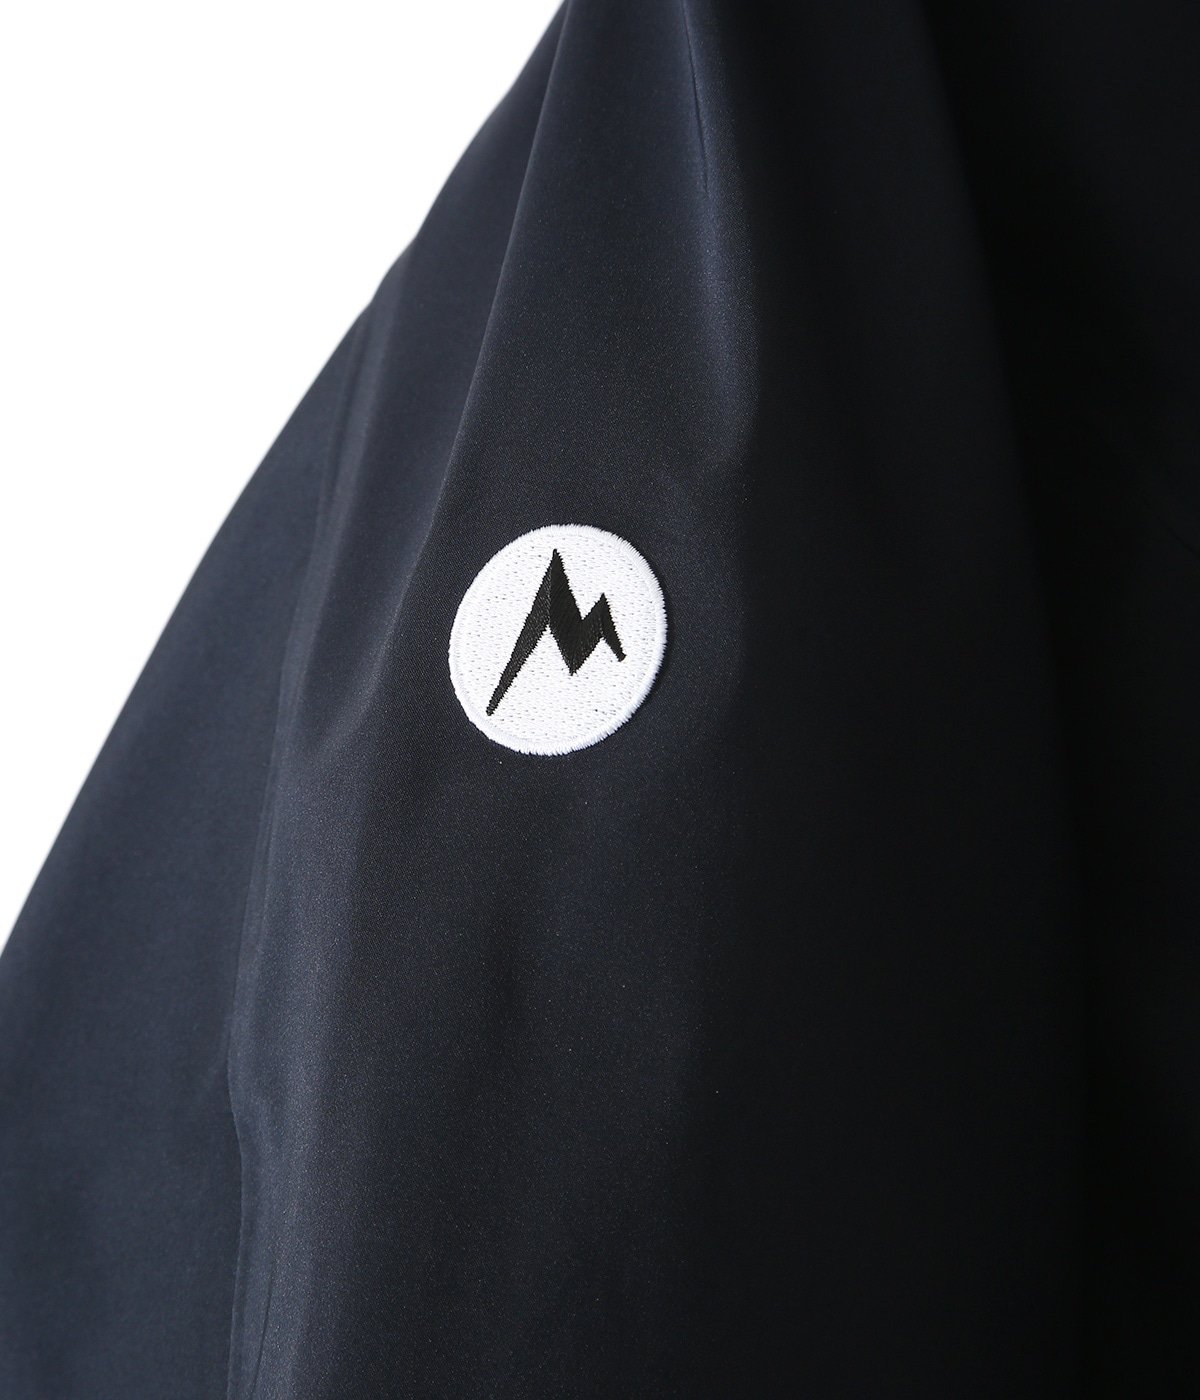 ONLY ARK】別注 GORE-TEX 3L A Jacket | Marmot(マーモット